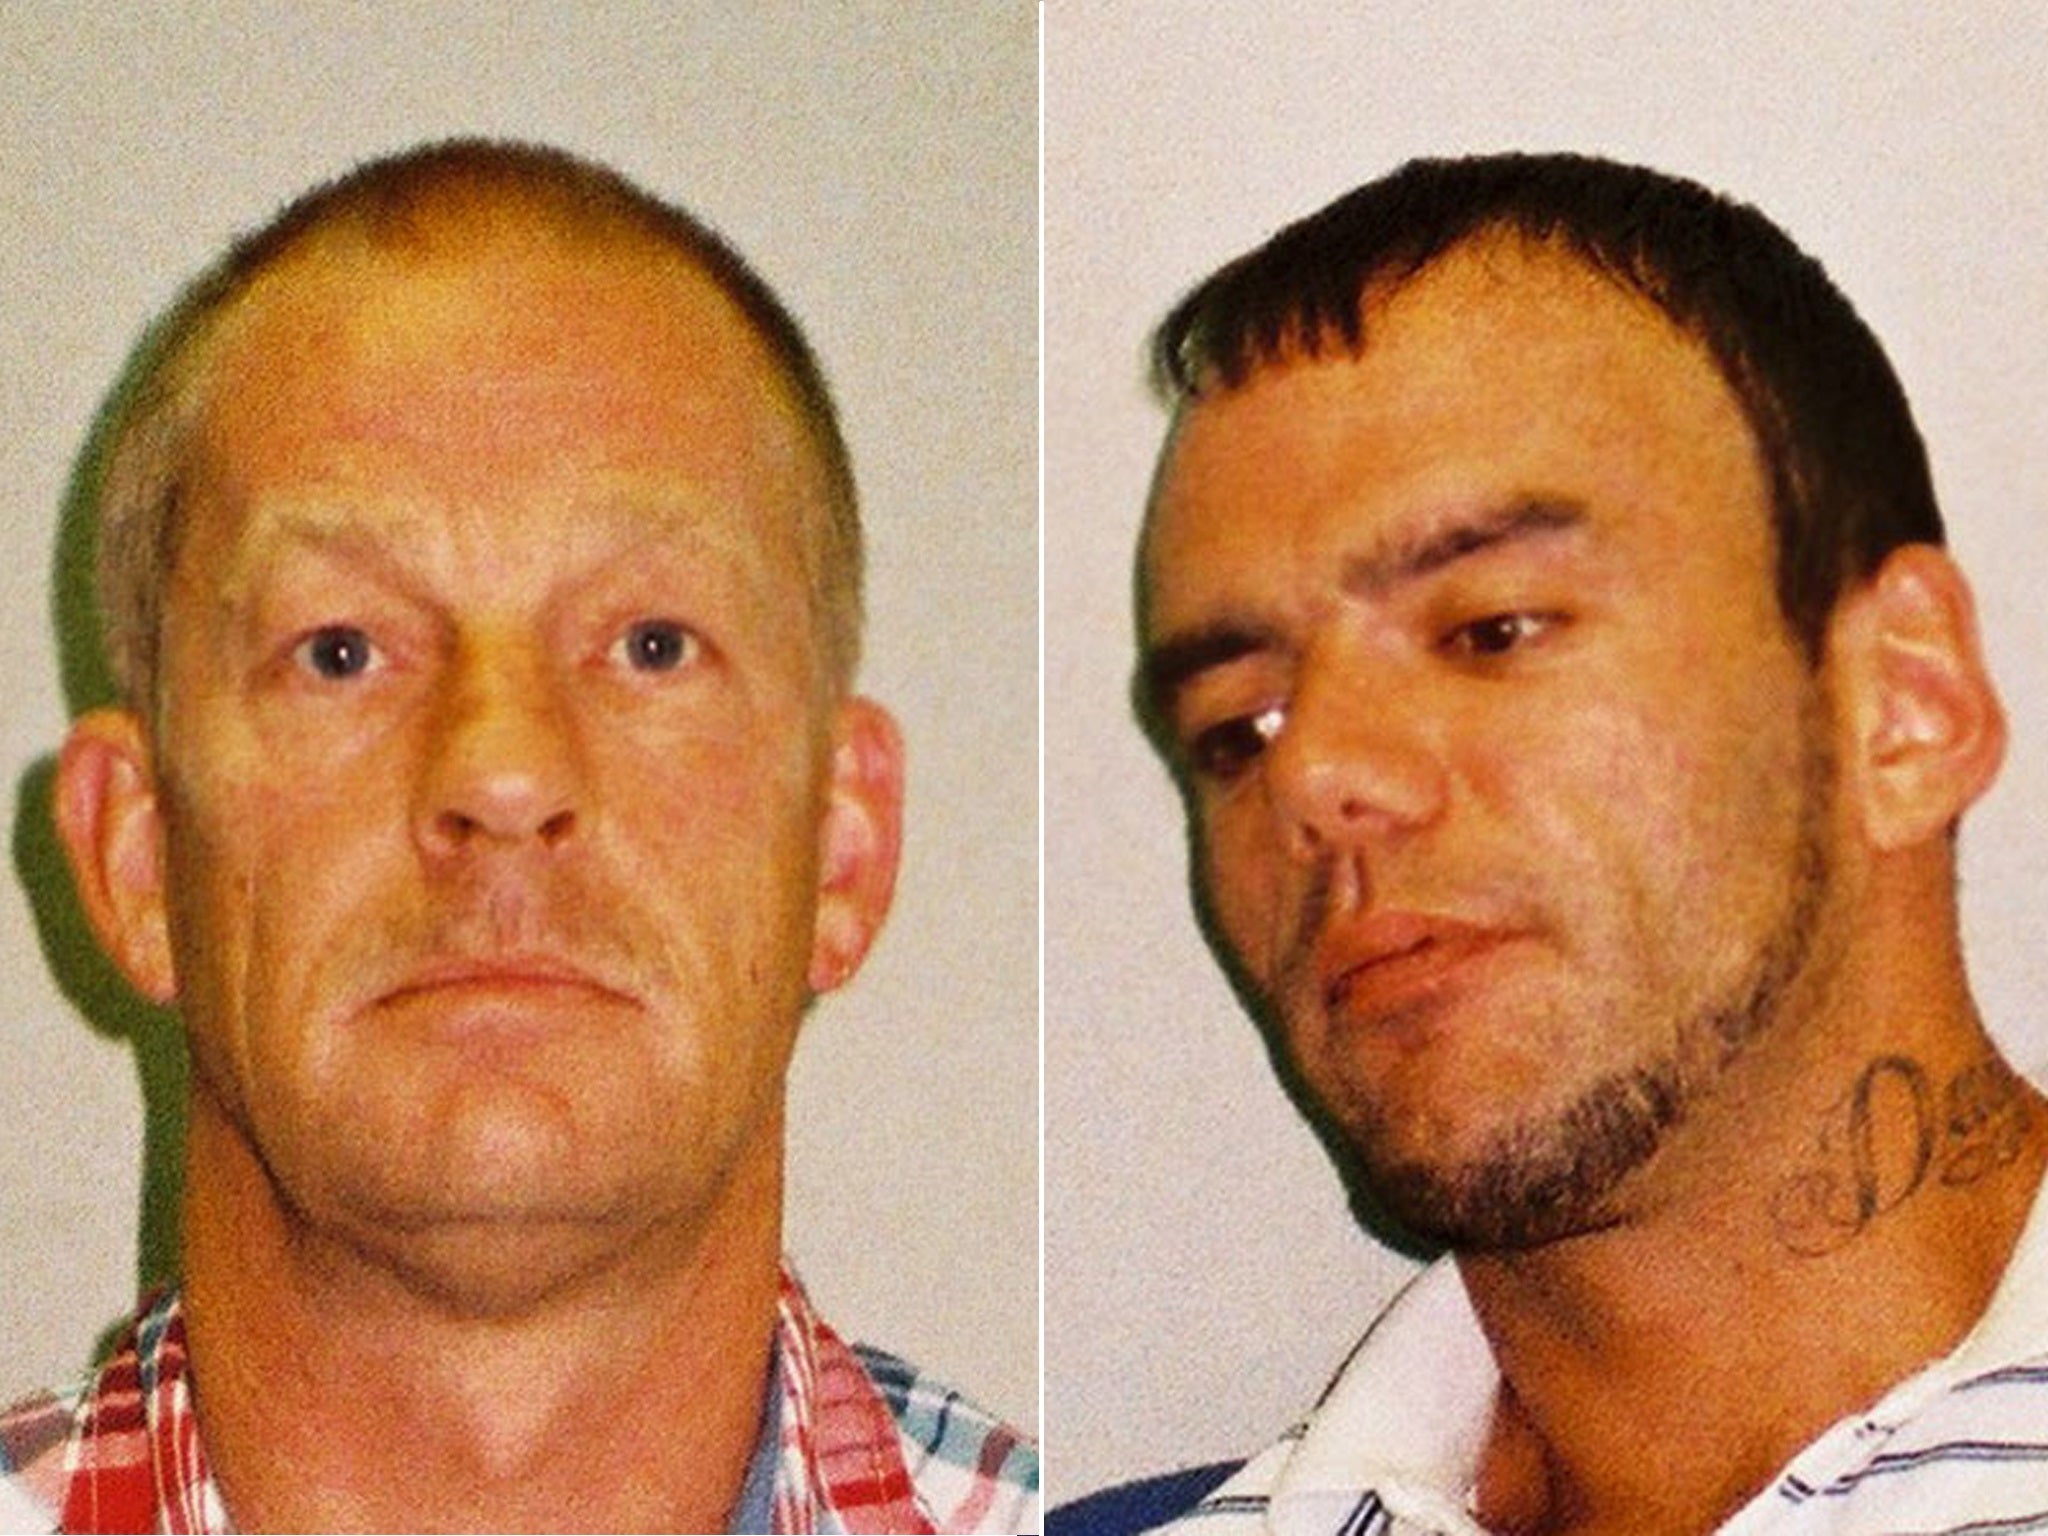 Layton Davies, left, and George Powell, who were found guilty after a trial of conspiring to cover up their once-in-a-lifetime discovery